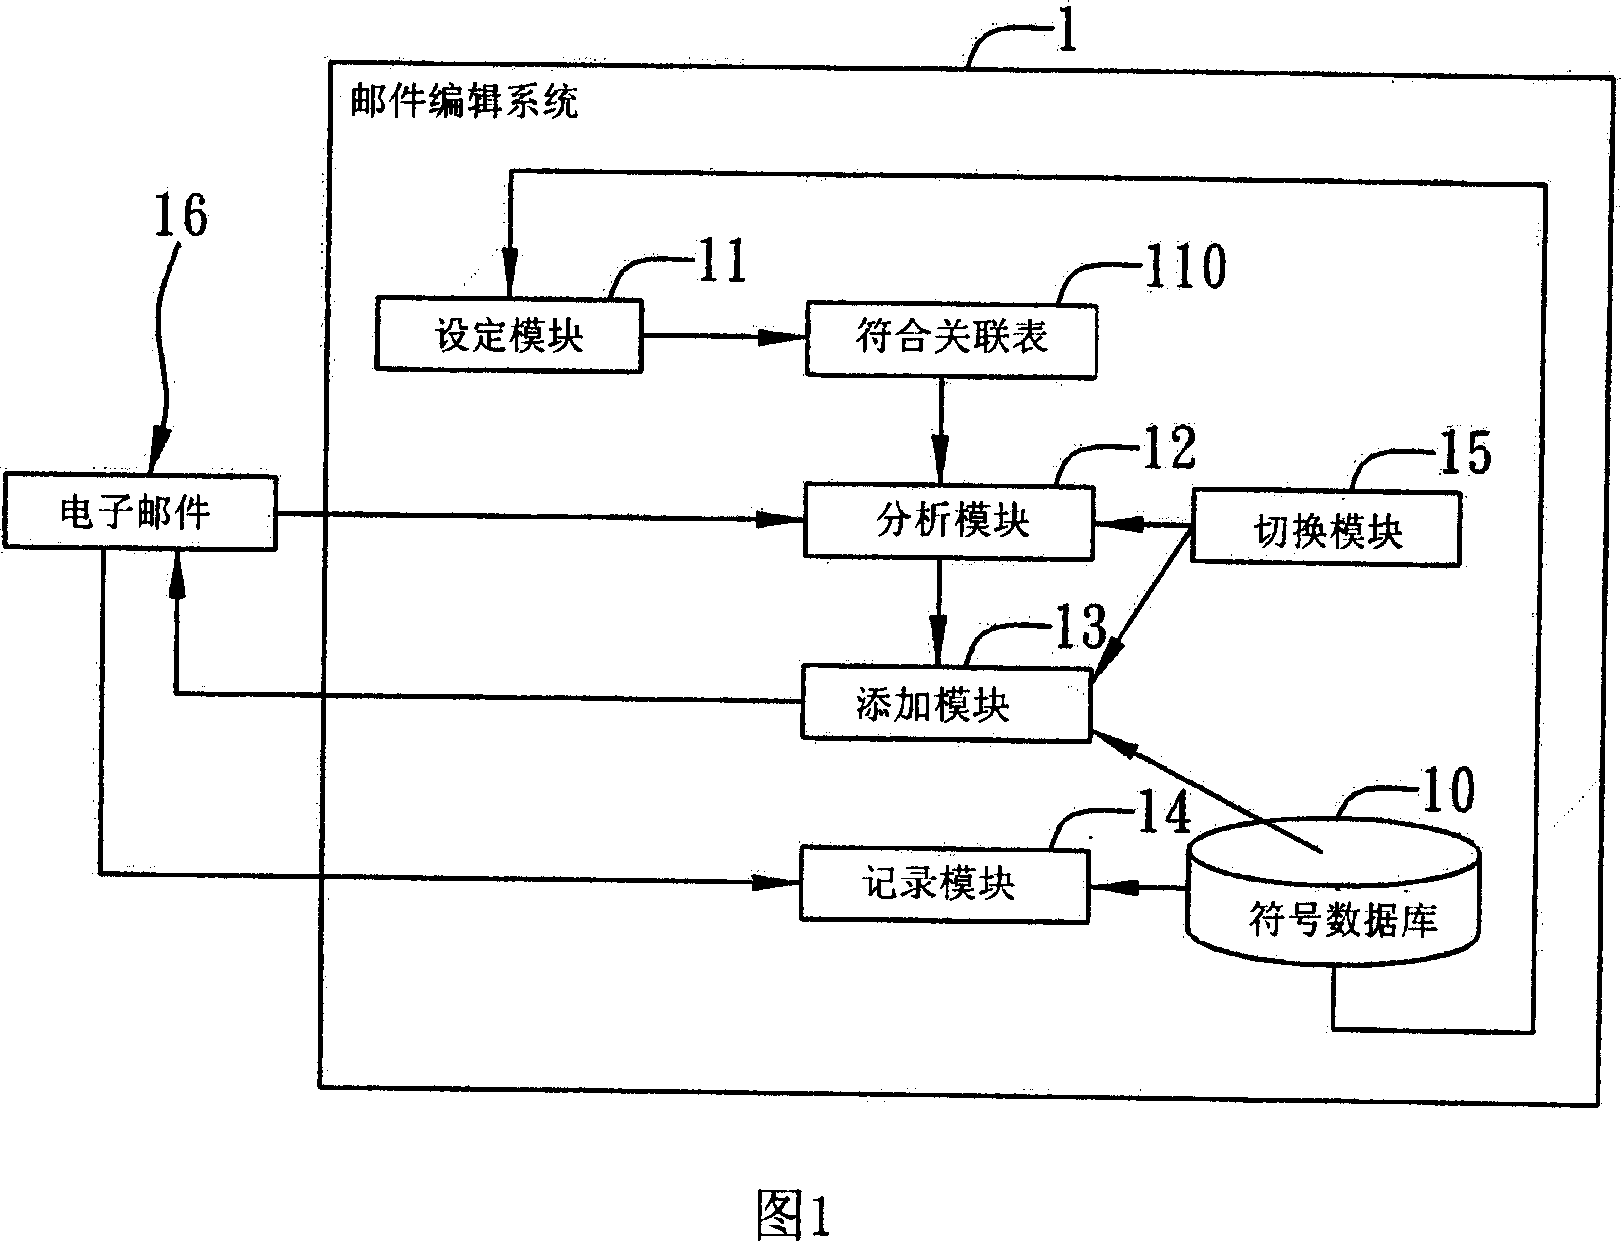 Mail editing system and method